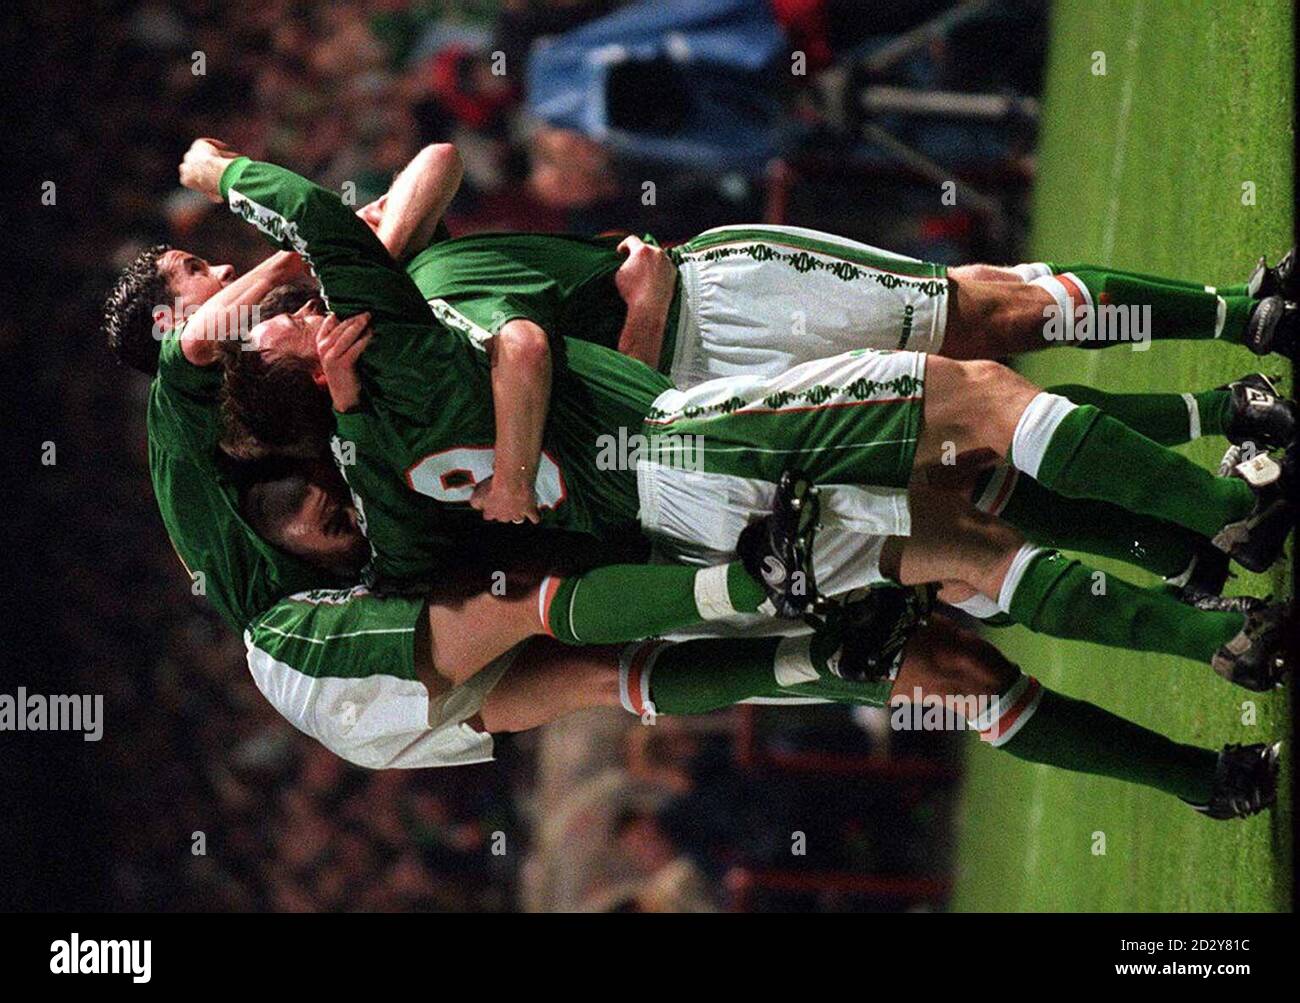 Republic of Ireland players celebratefollowing Dennis Irwin's goal during tonight's (Wednesday) World Cup play-offs against Belgium at Lansdowne Road. PA Photo Stock Photo